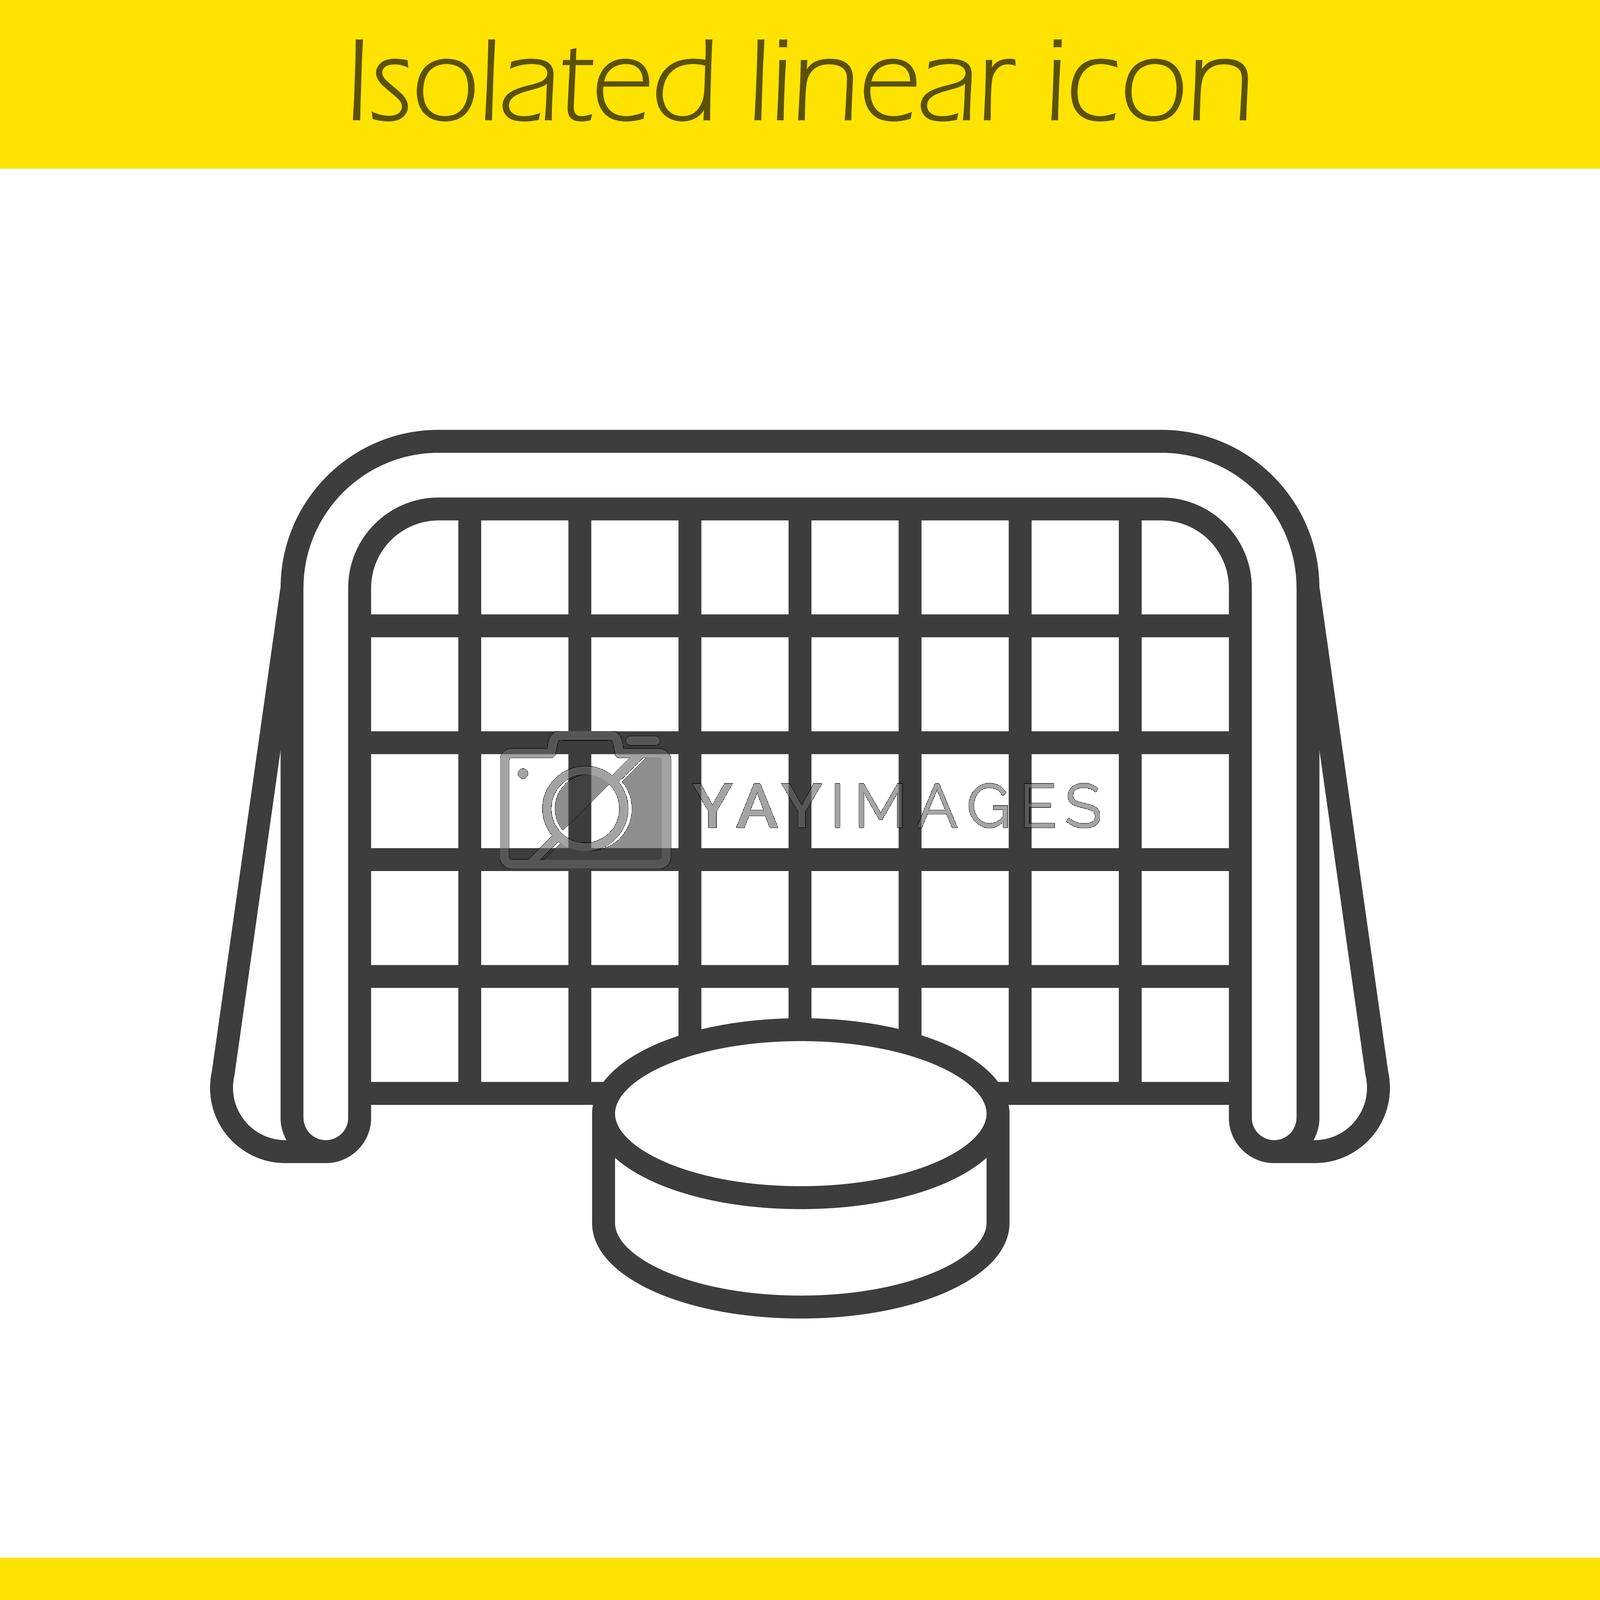 Royalty free image of Ice hockey gate and puck linear icon by bsd